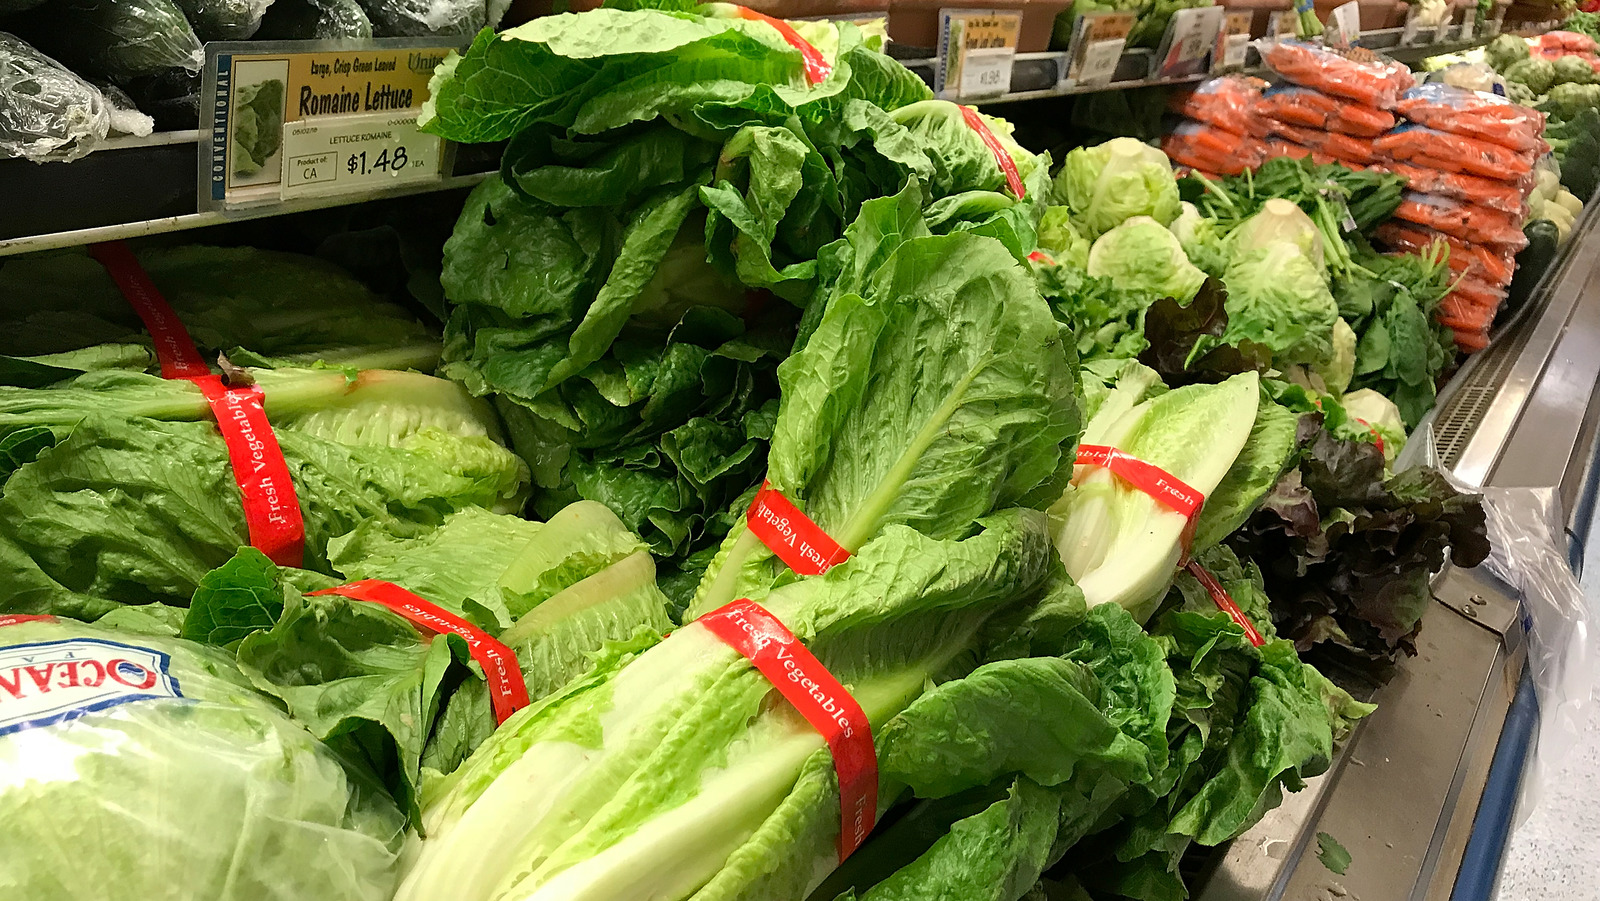 What To Know About Walmart's Massive Romaine Lettuce Recall